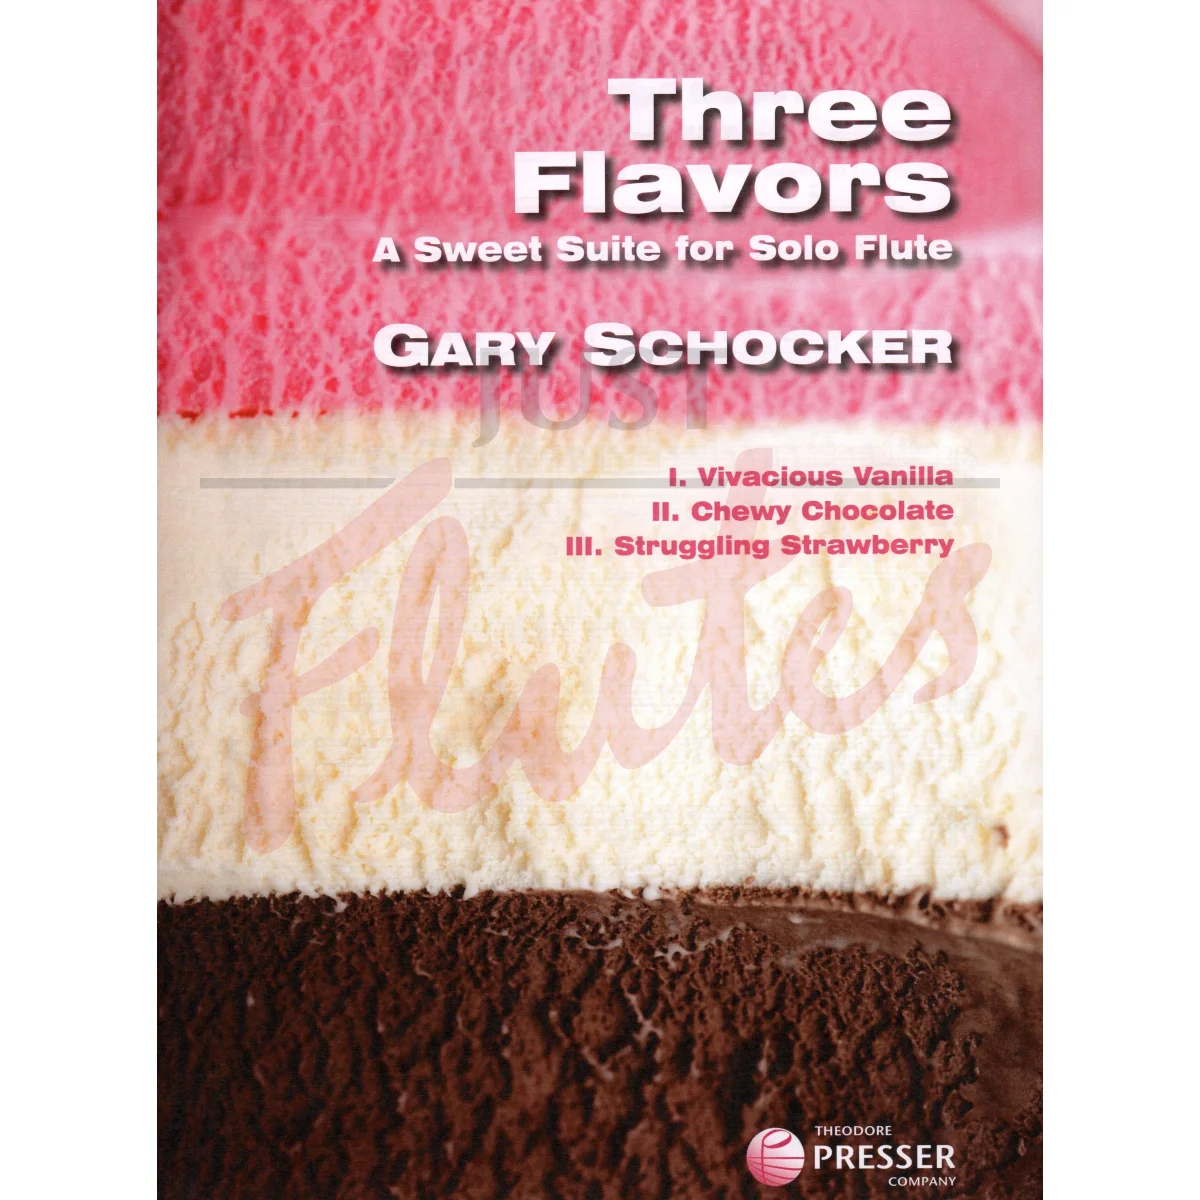 Three Flavors - A Sweet Suite for Solo Flute